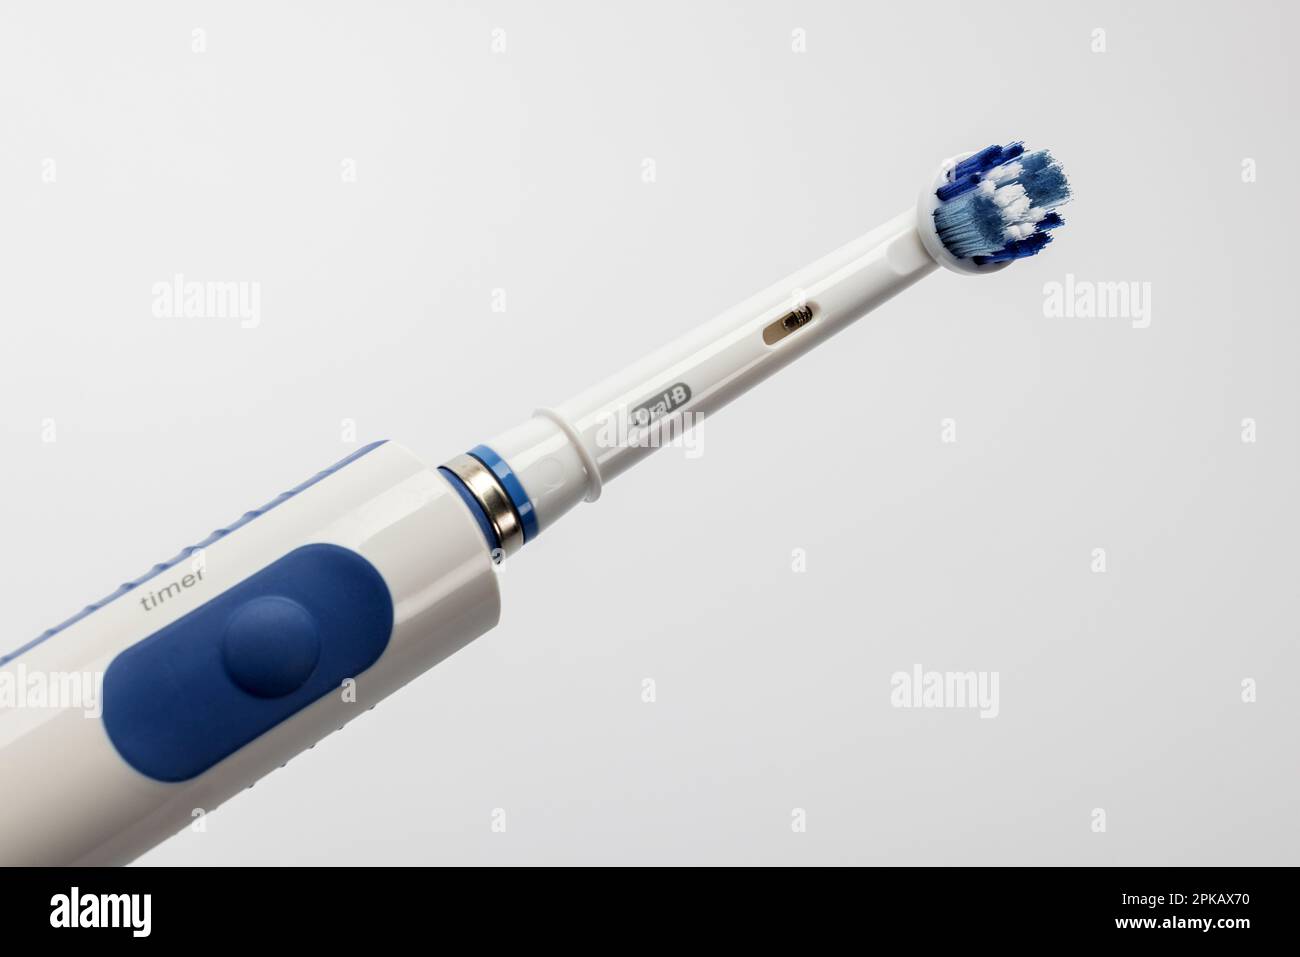 Braun Oral-B Type 4729 electric toothbrush, detail, attachment brush, white  background Stock Photo - Alamy